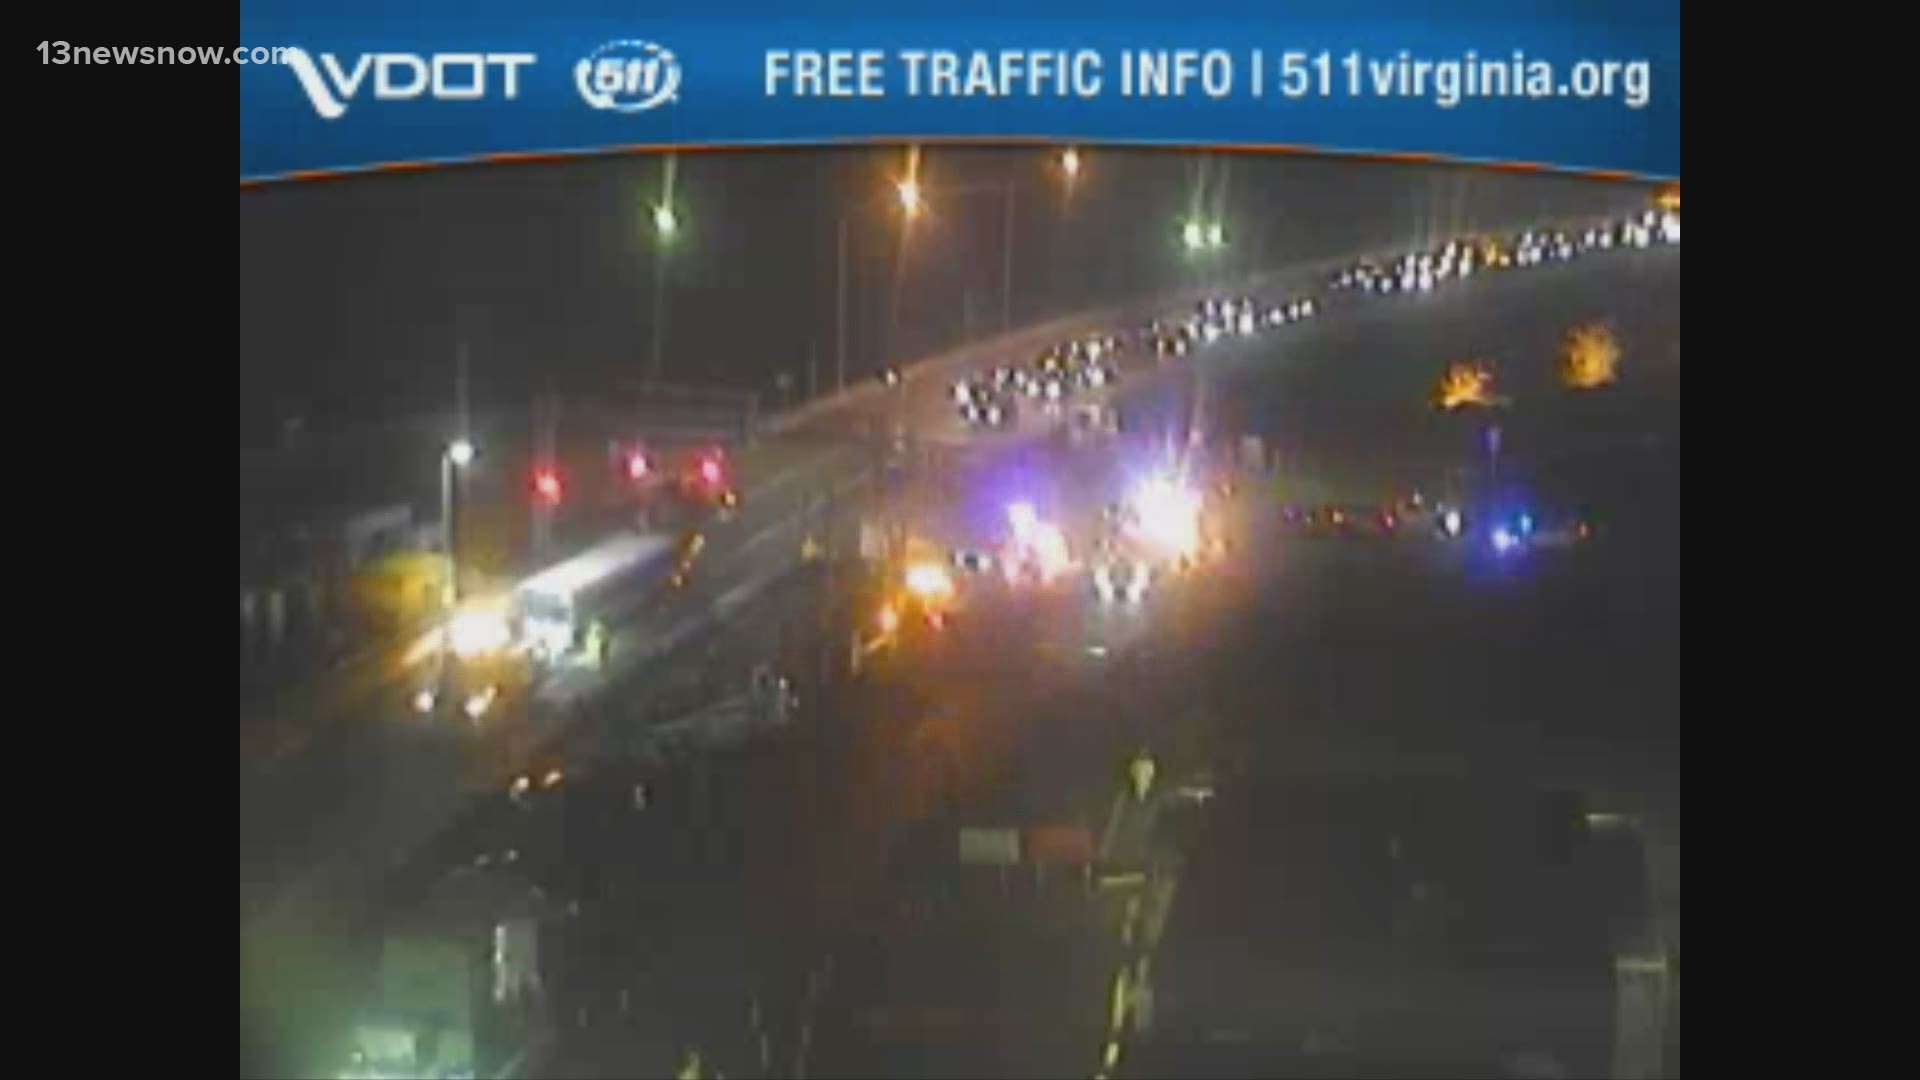 Virginia State Police say the accident happened at about 9:09 p.m. The HRT bus was the only vehicle involved in the crash, and no injuries are reported.